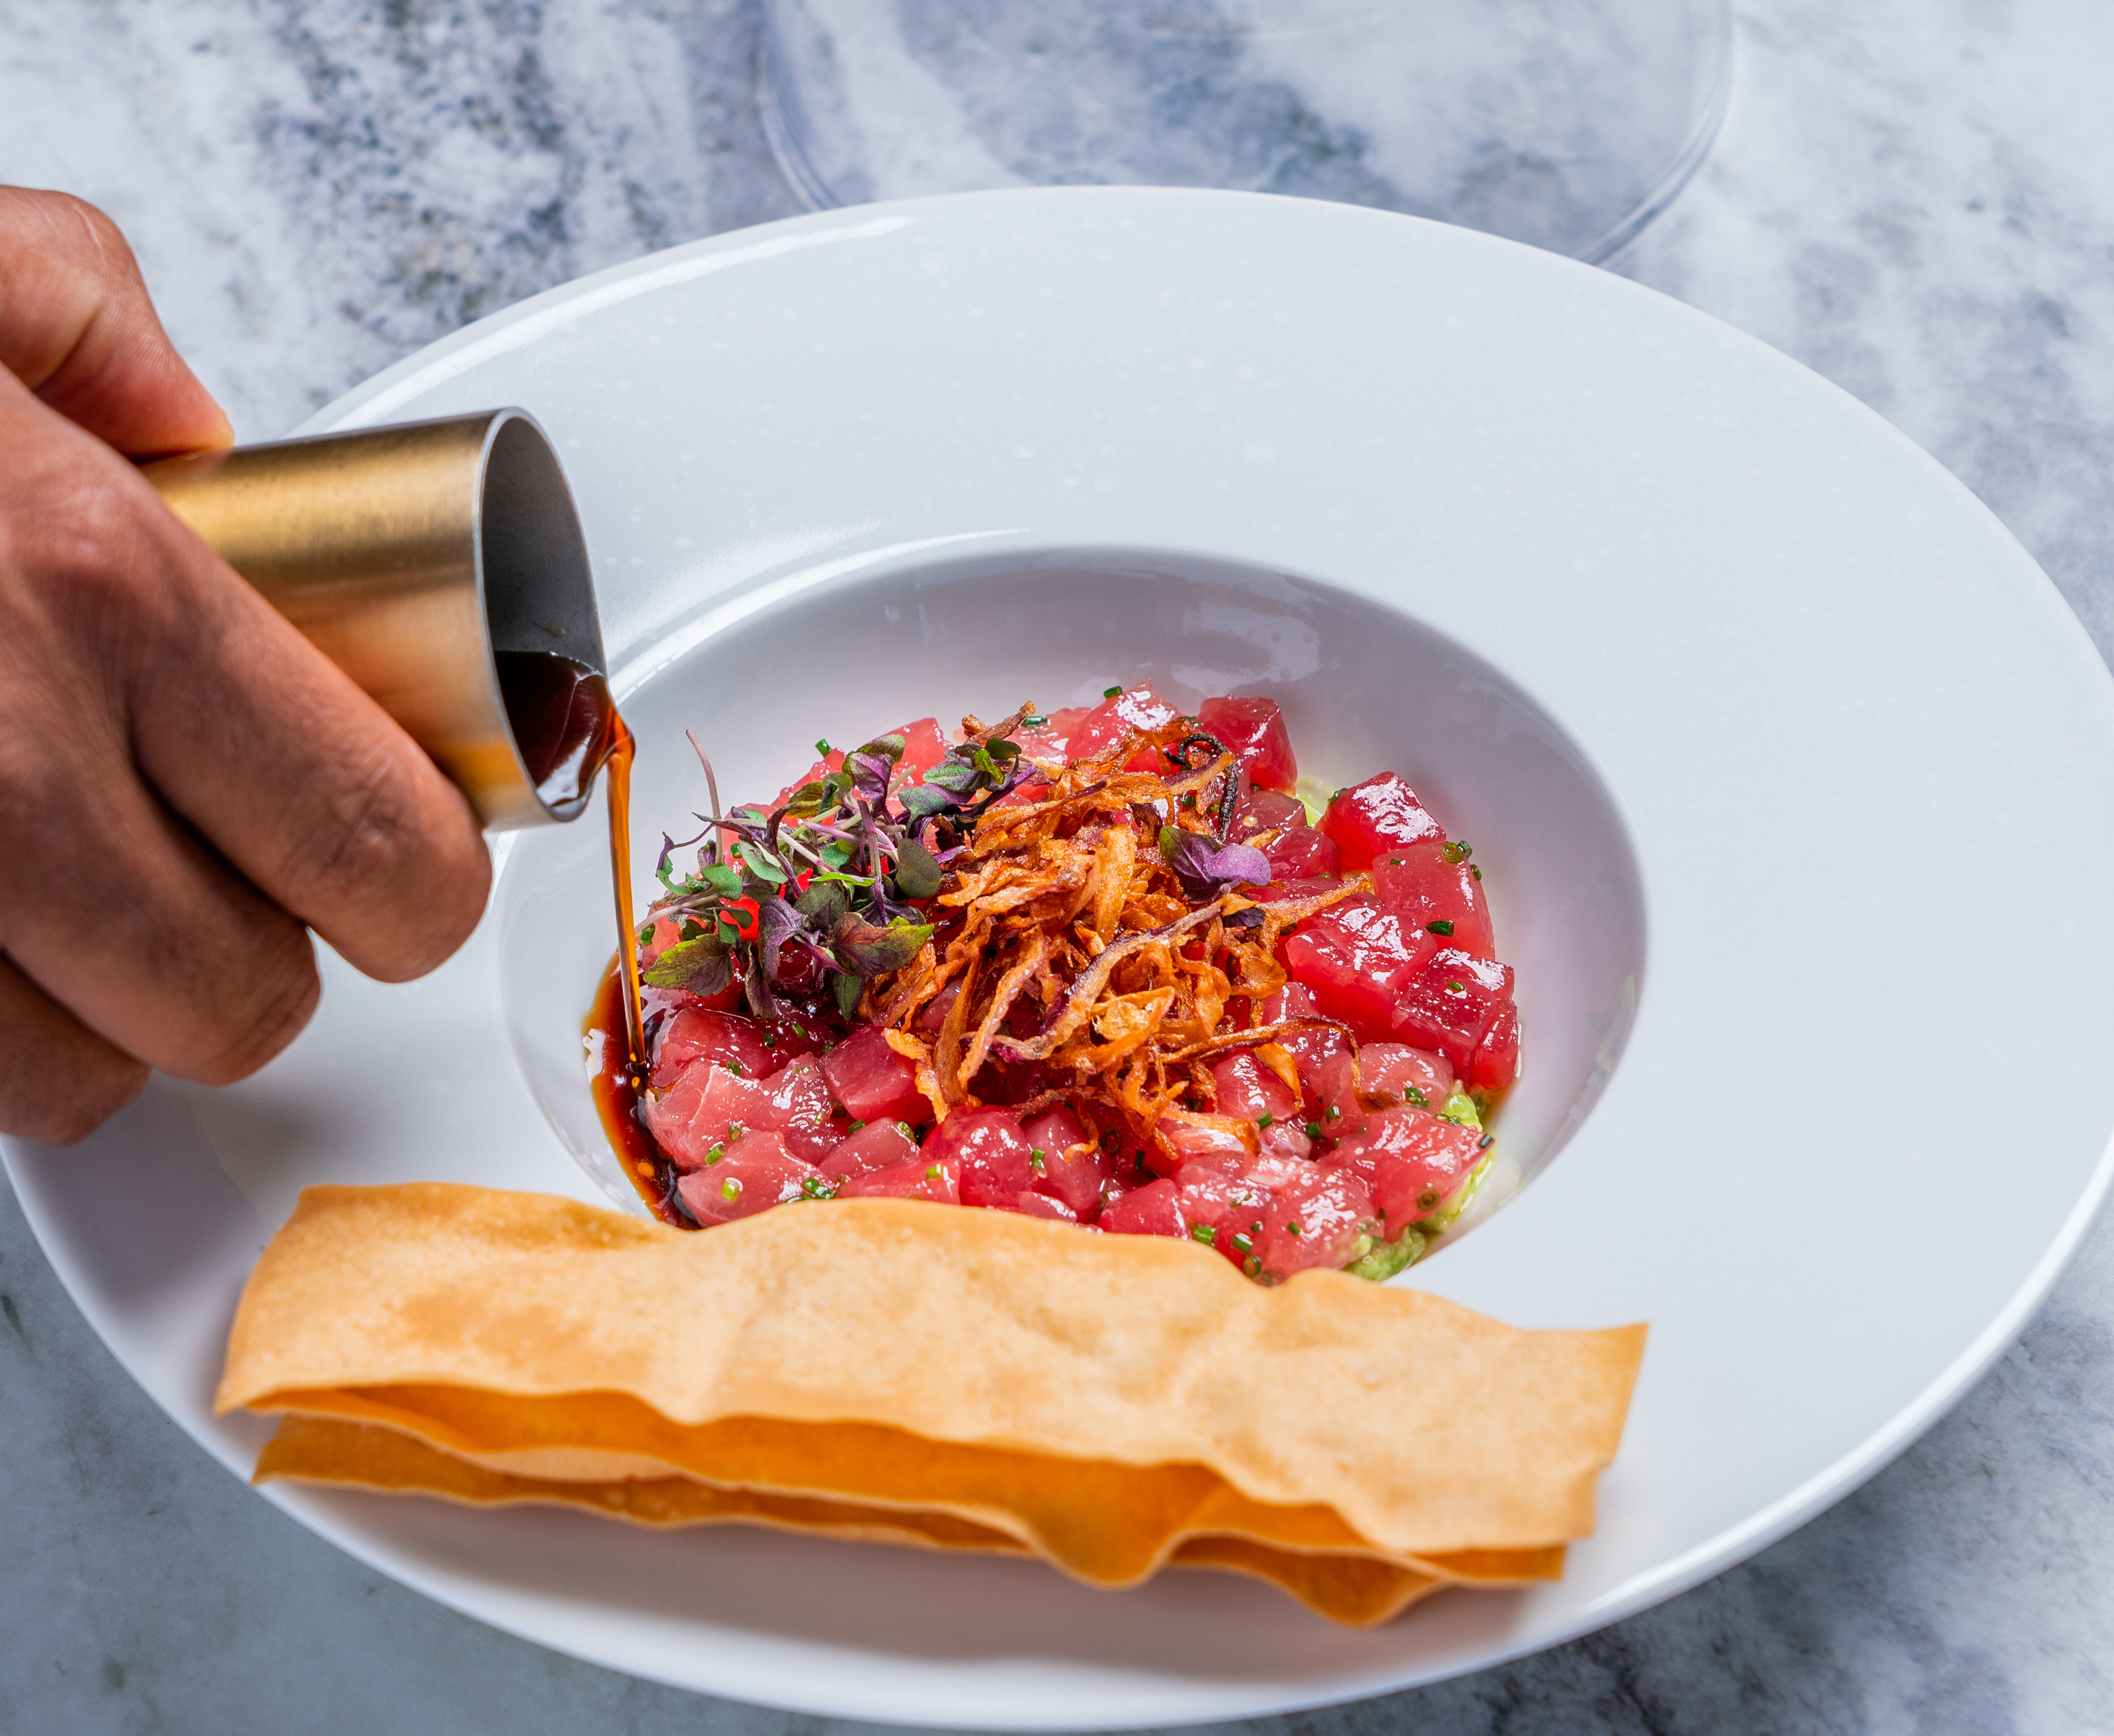 Blue fin tartare at the new Sparrow in Downtown LA’s Hotel Figueroa in a bowl with crackers.